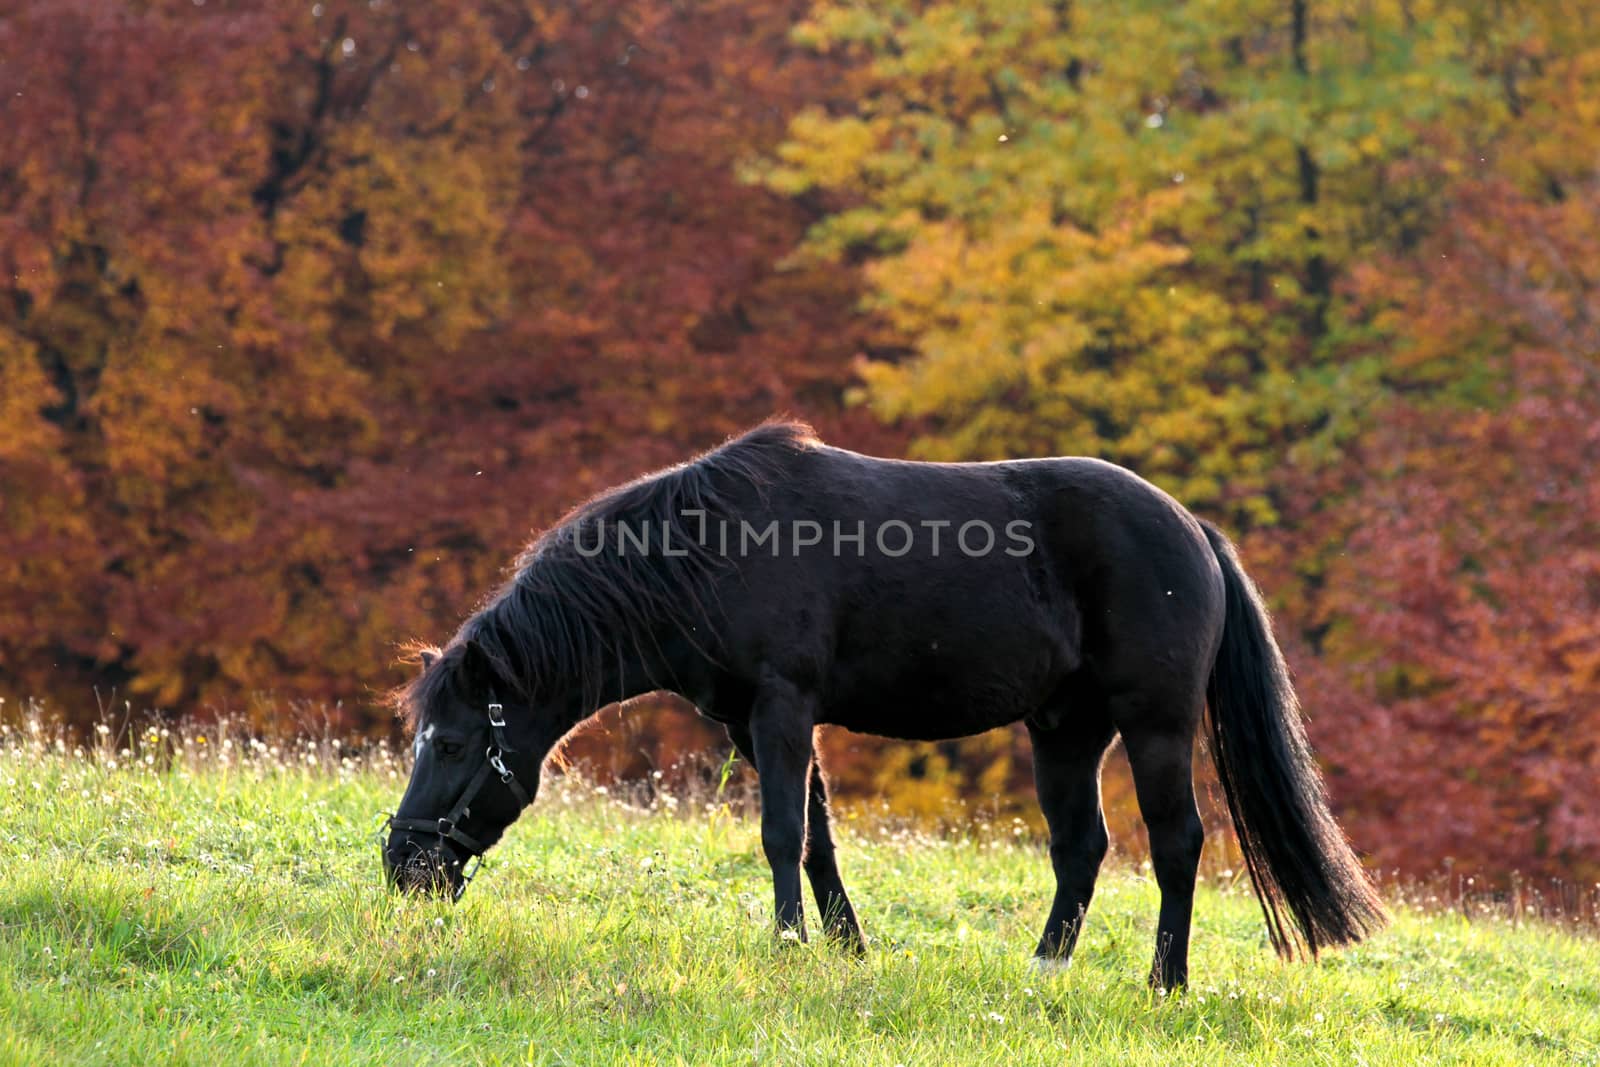 Ravnsholt Skov forest in  Alleroed - Denmark in autumn and a horse